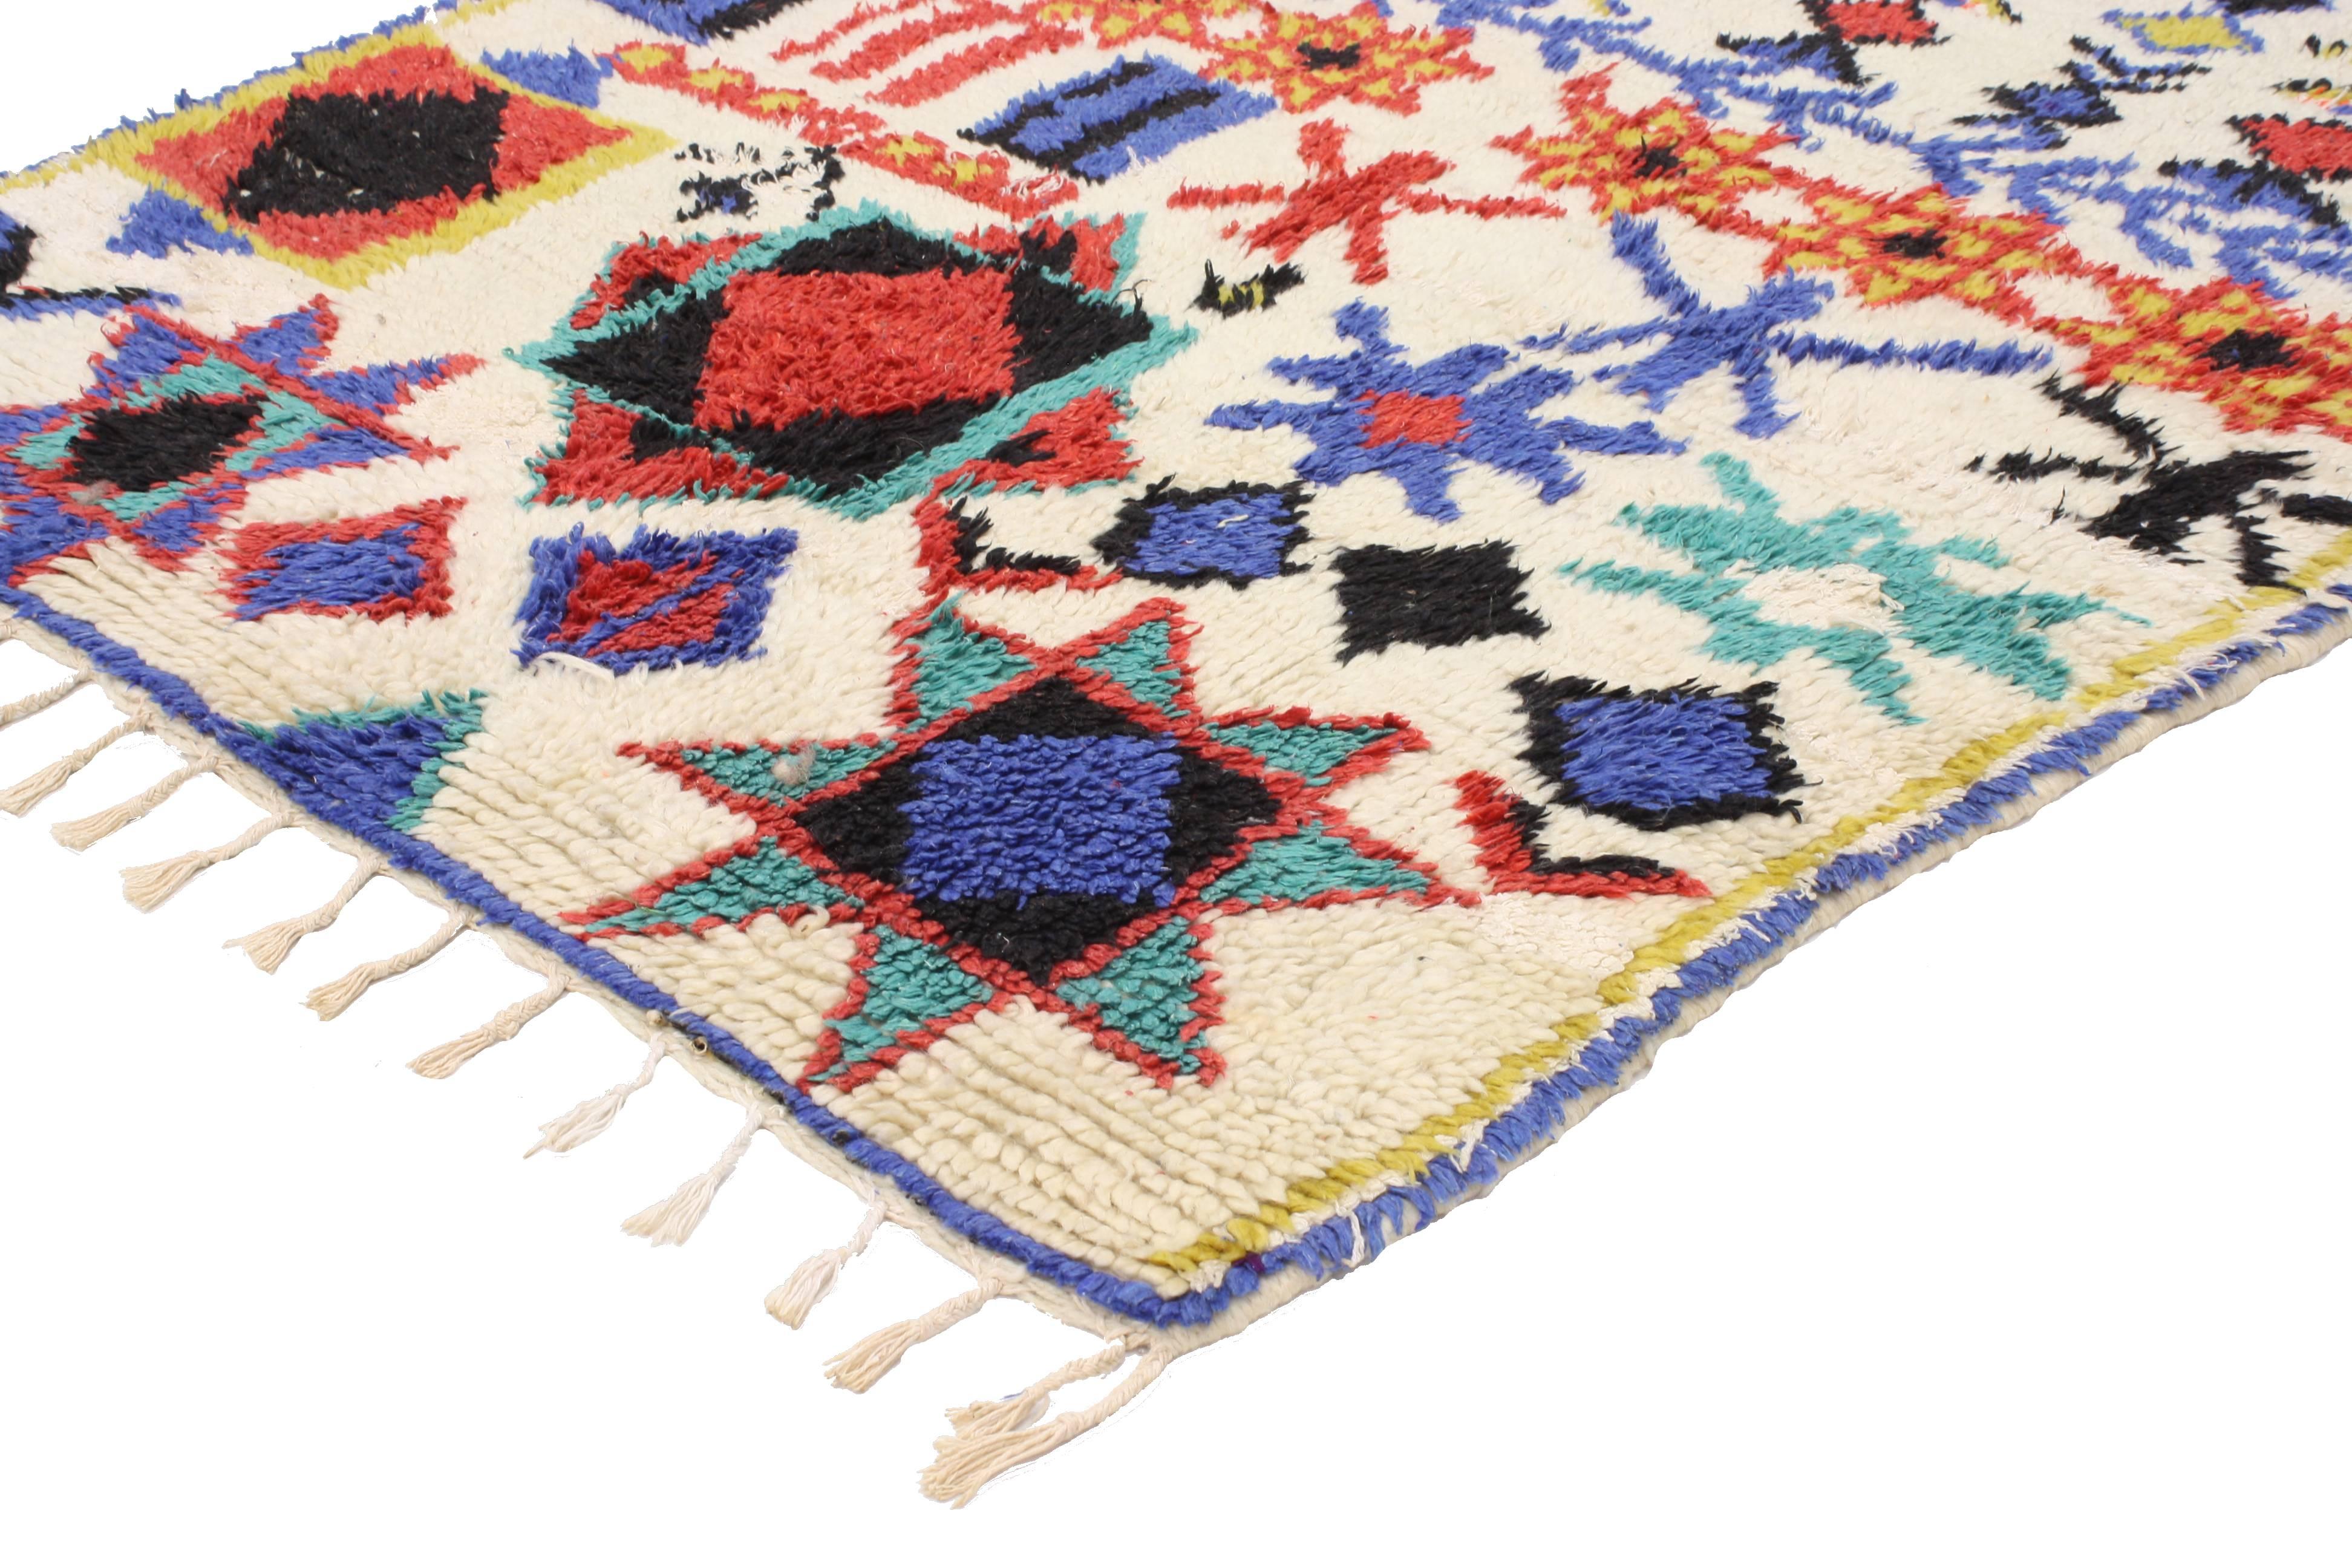 This vintage Berber Moroccan rug was made in Azilal in the High Atlas Mountains. Like typical Azilal rugs and carpets, this Moroccan rug features an ivory-white field with symbolic tribal motifs in vibrant colors. Rendered in ivory-white, blue, red,